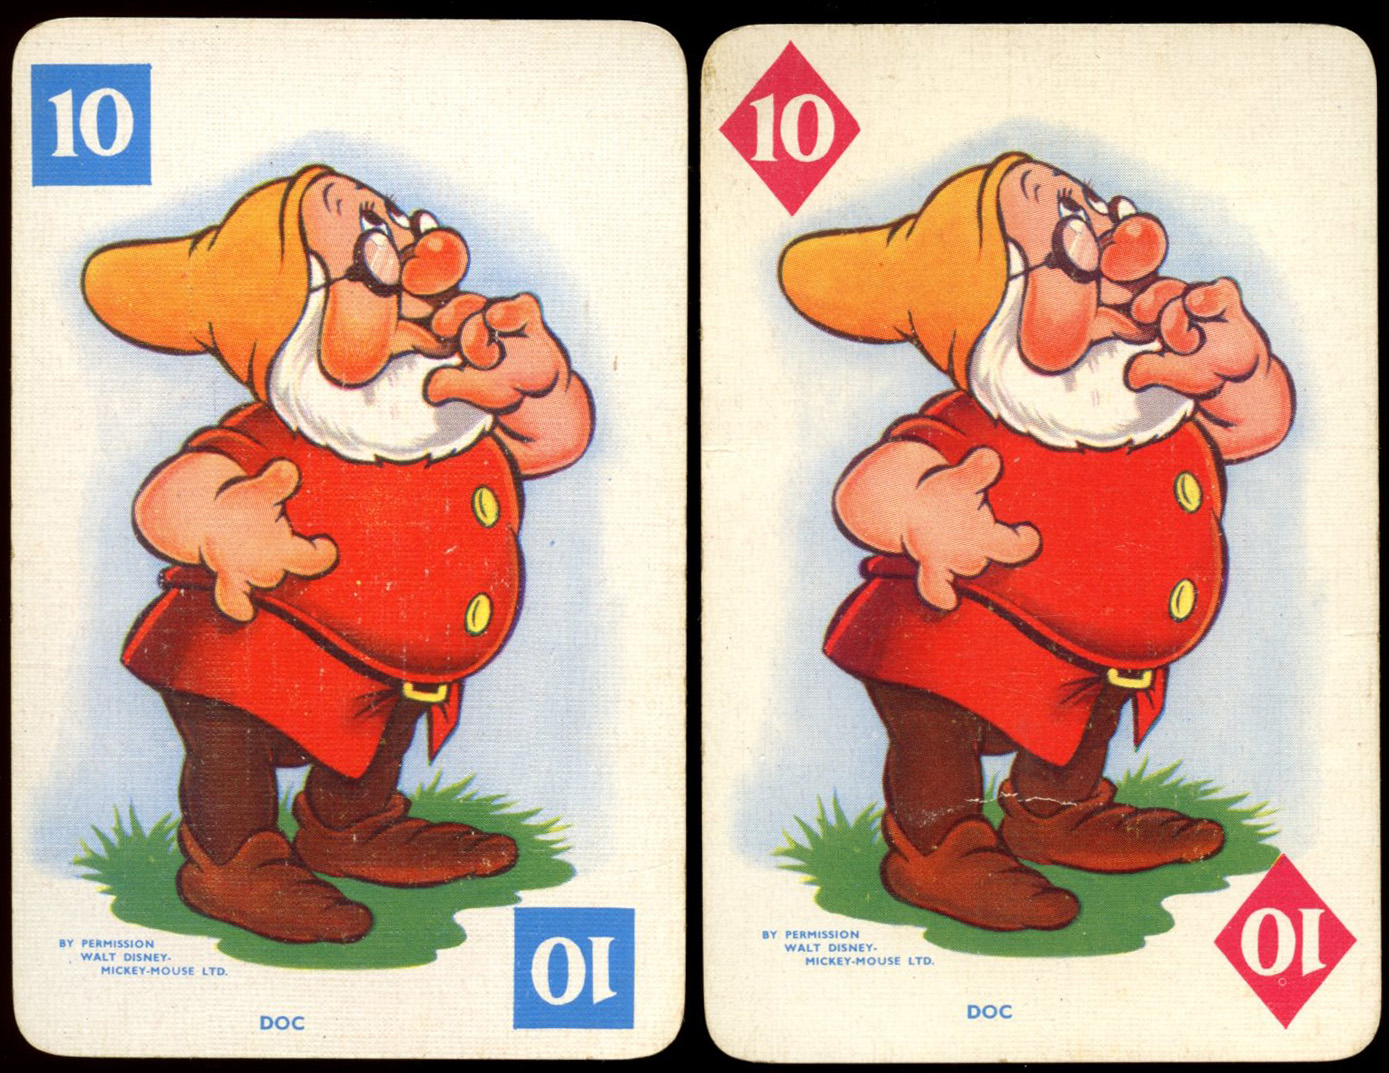 ... they skipped to the 10 card which is shared between Doc and Dopey